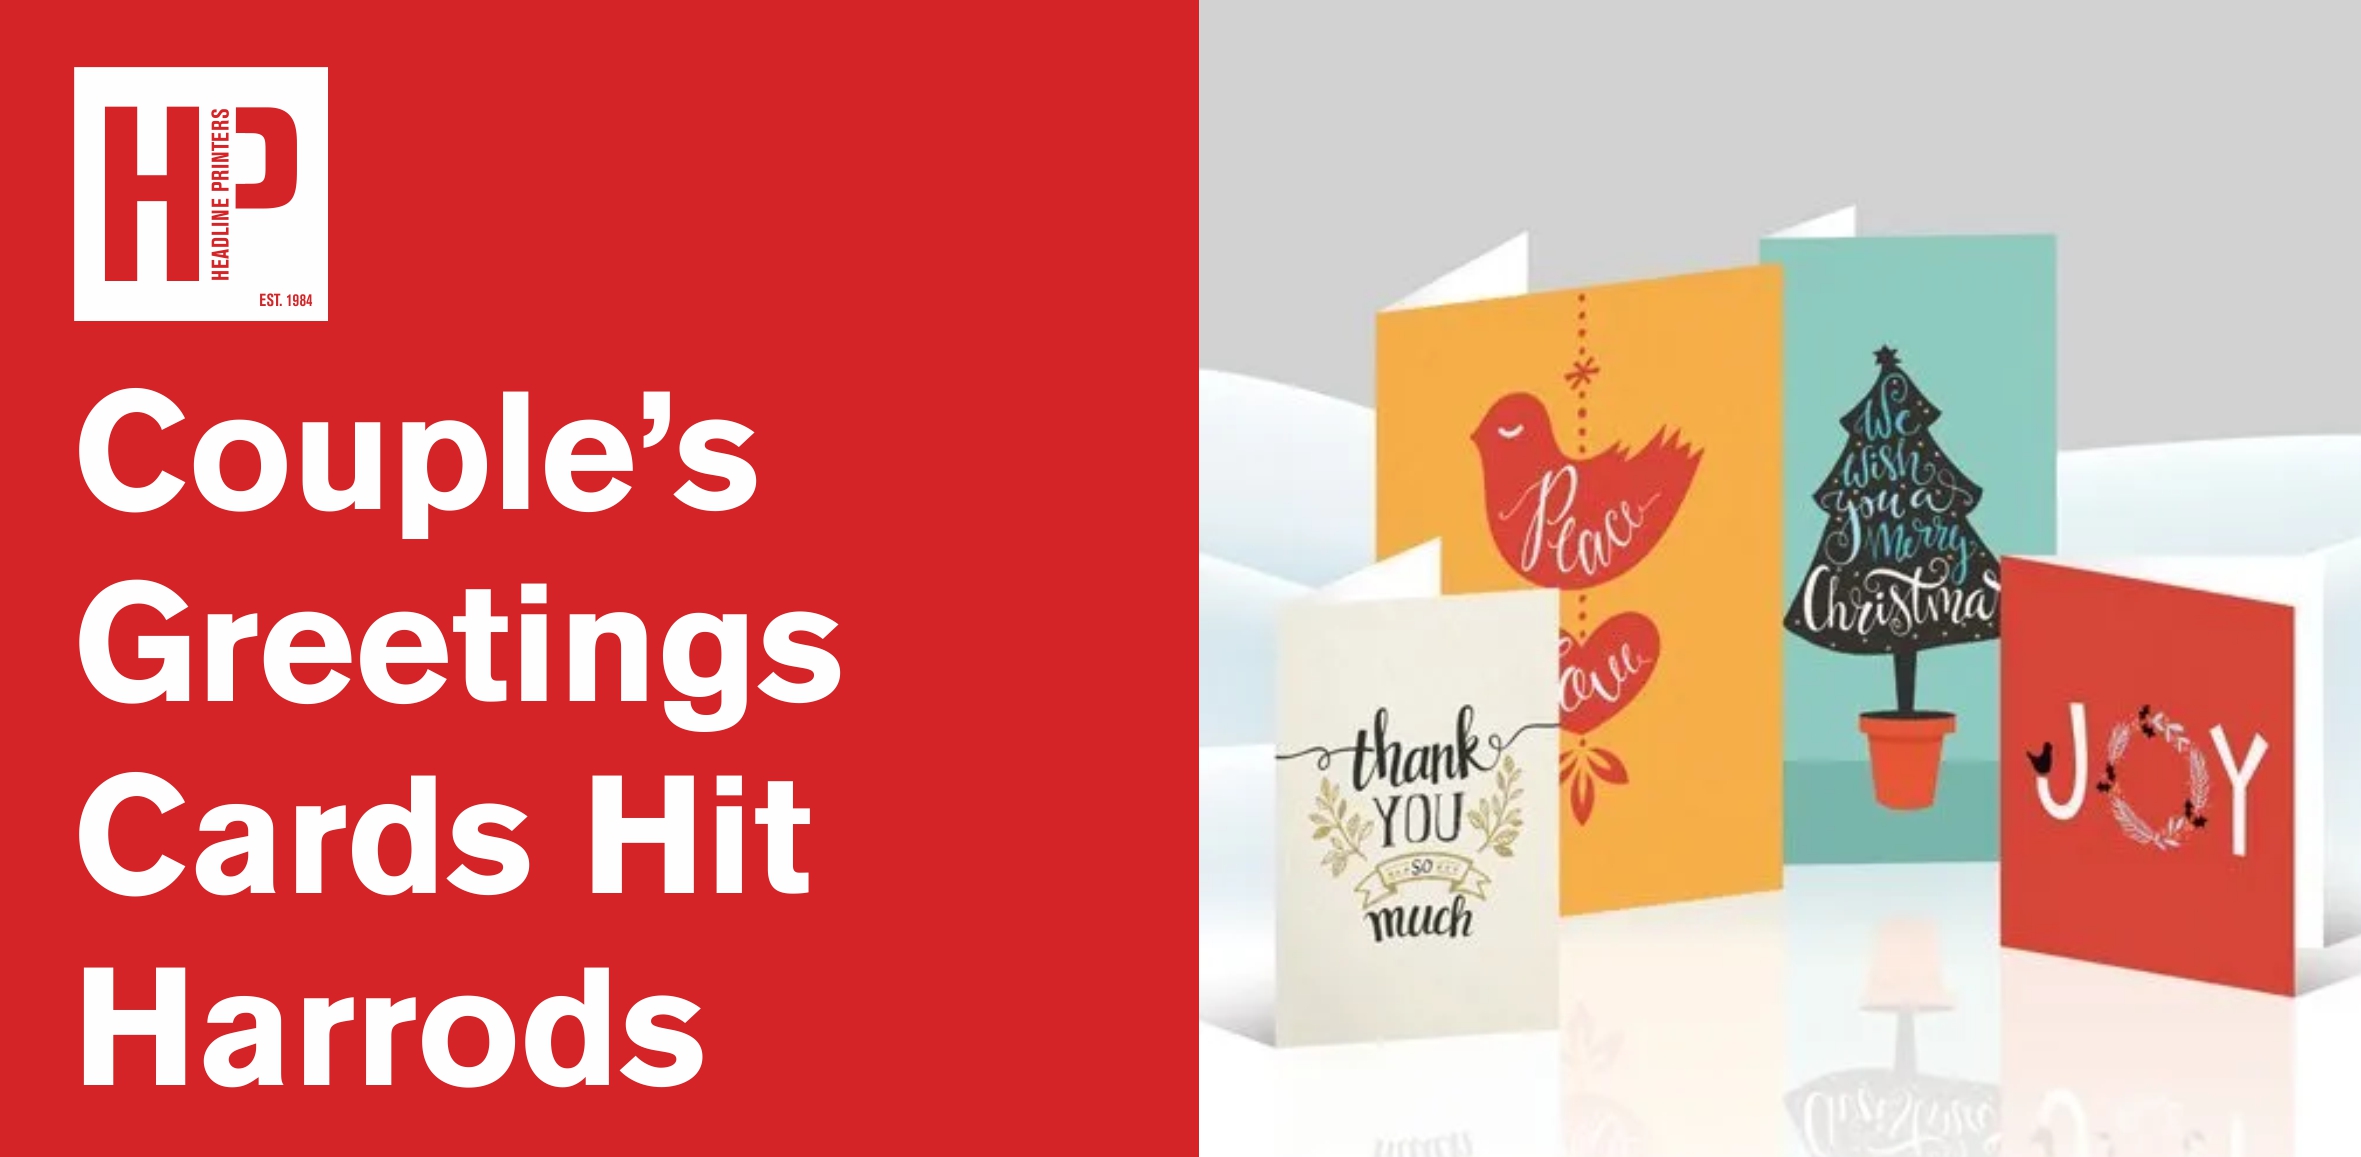 Couple’s Greetings Cards Hit Harrods